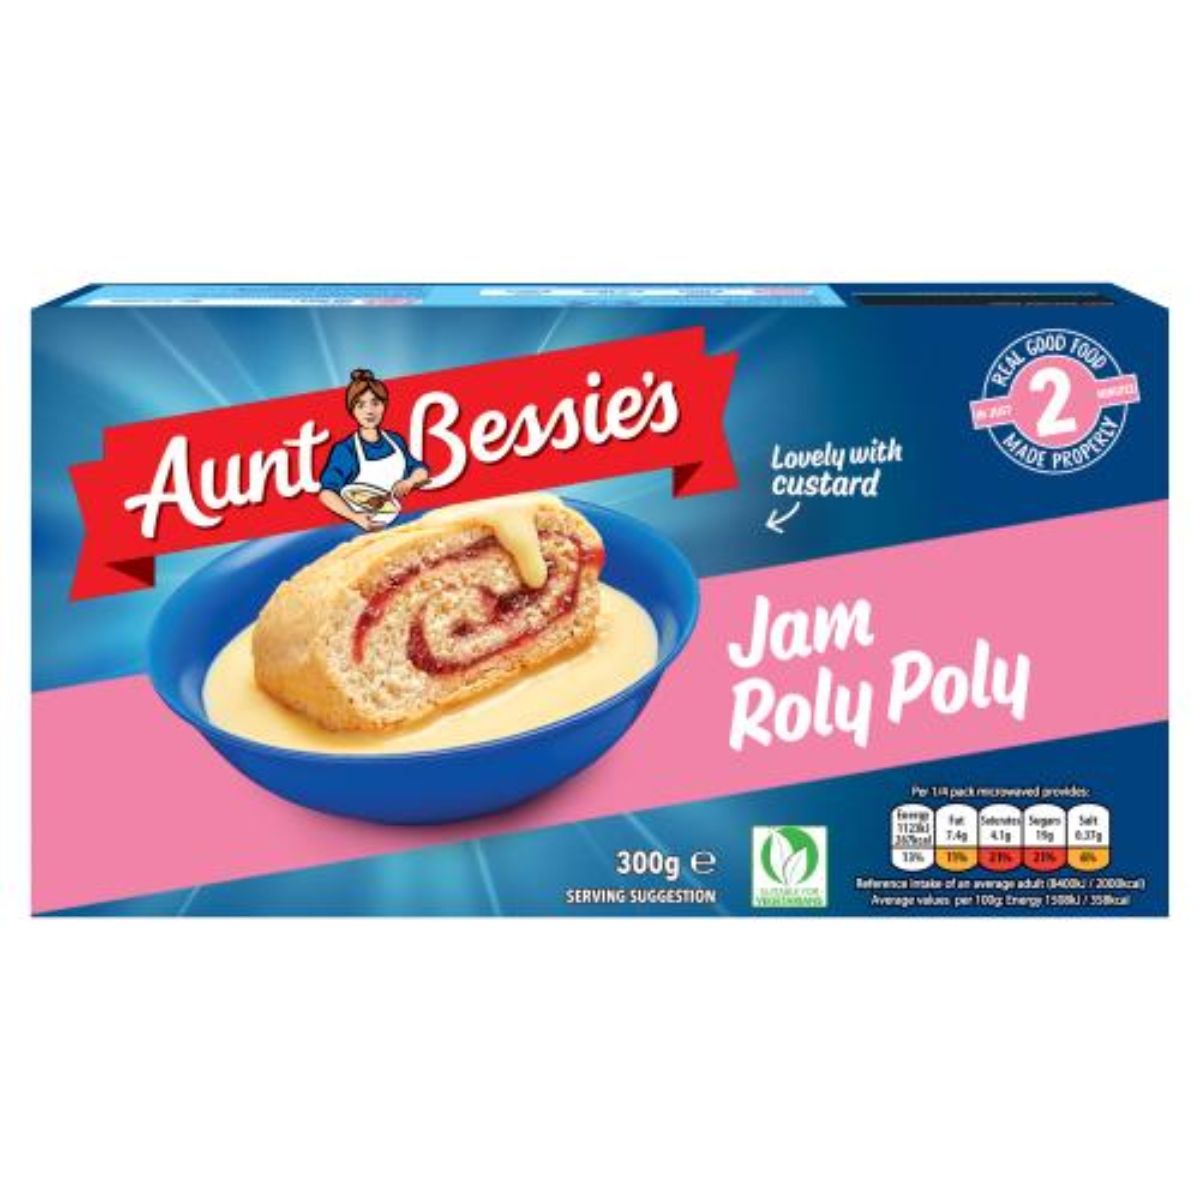 A box of Aunt Bessies - Jam Roly Poly - 300g in a blue bowl.